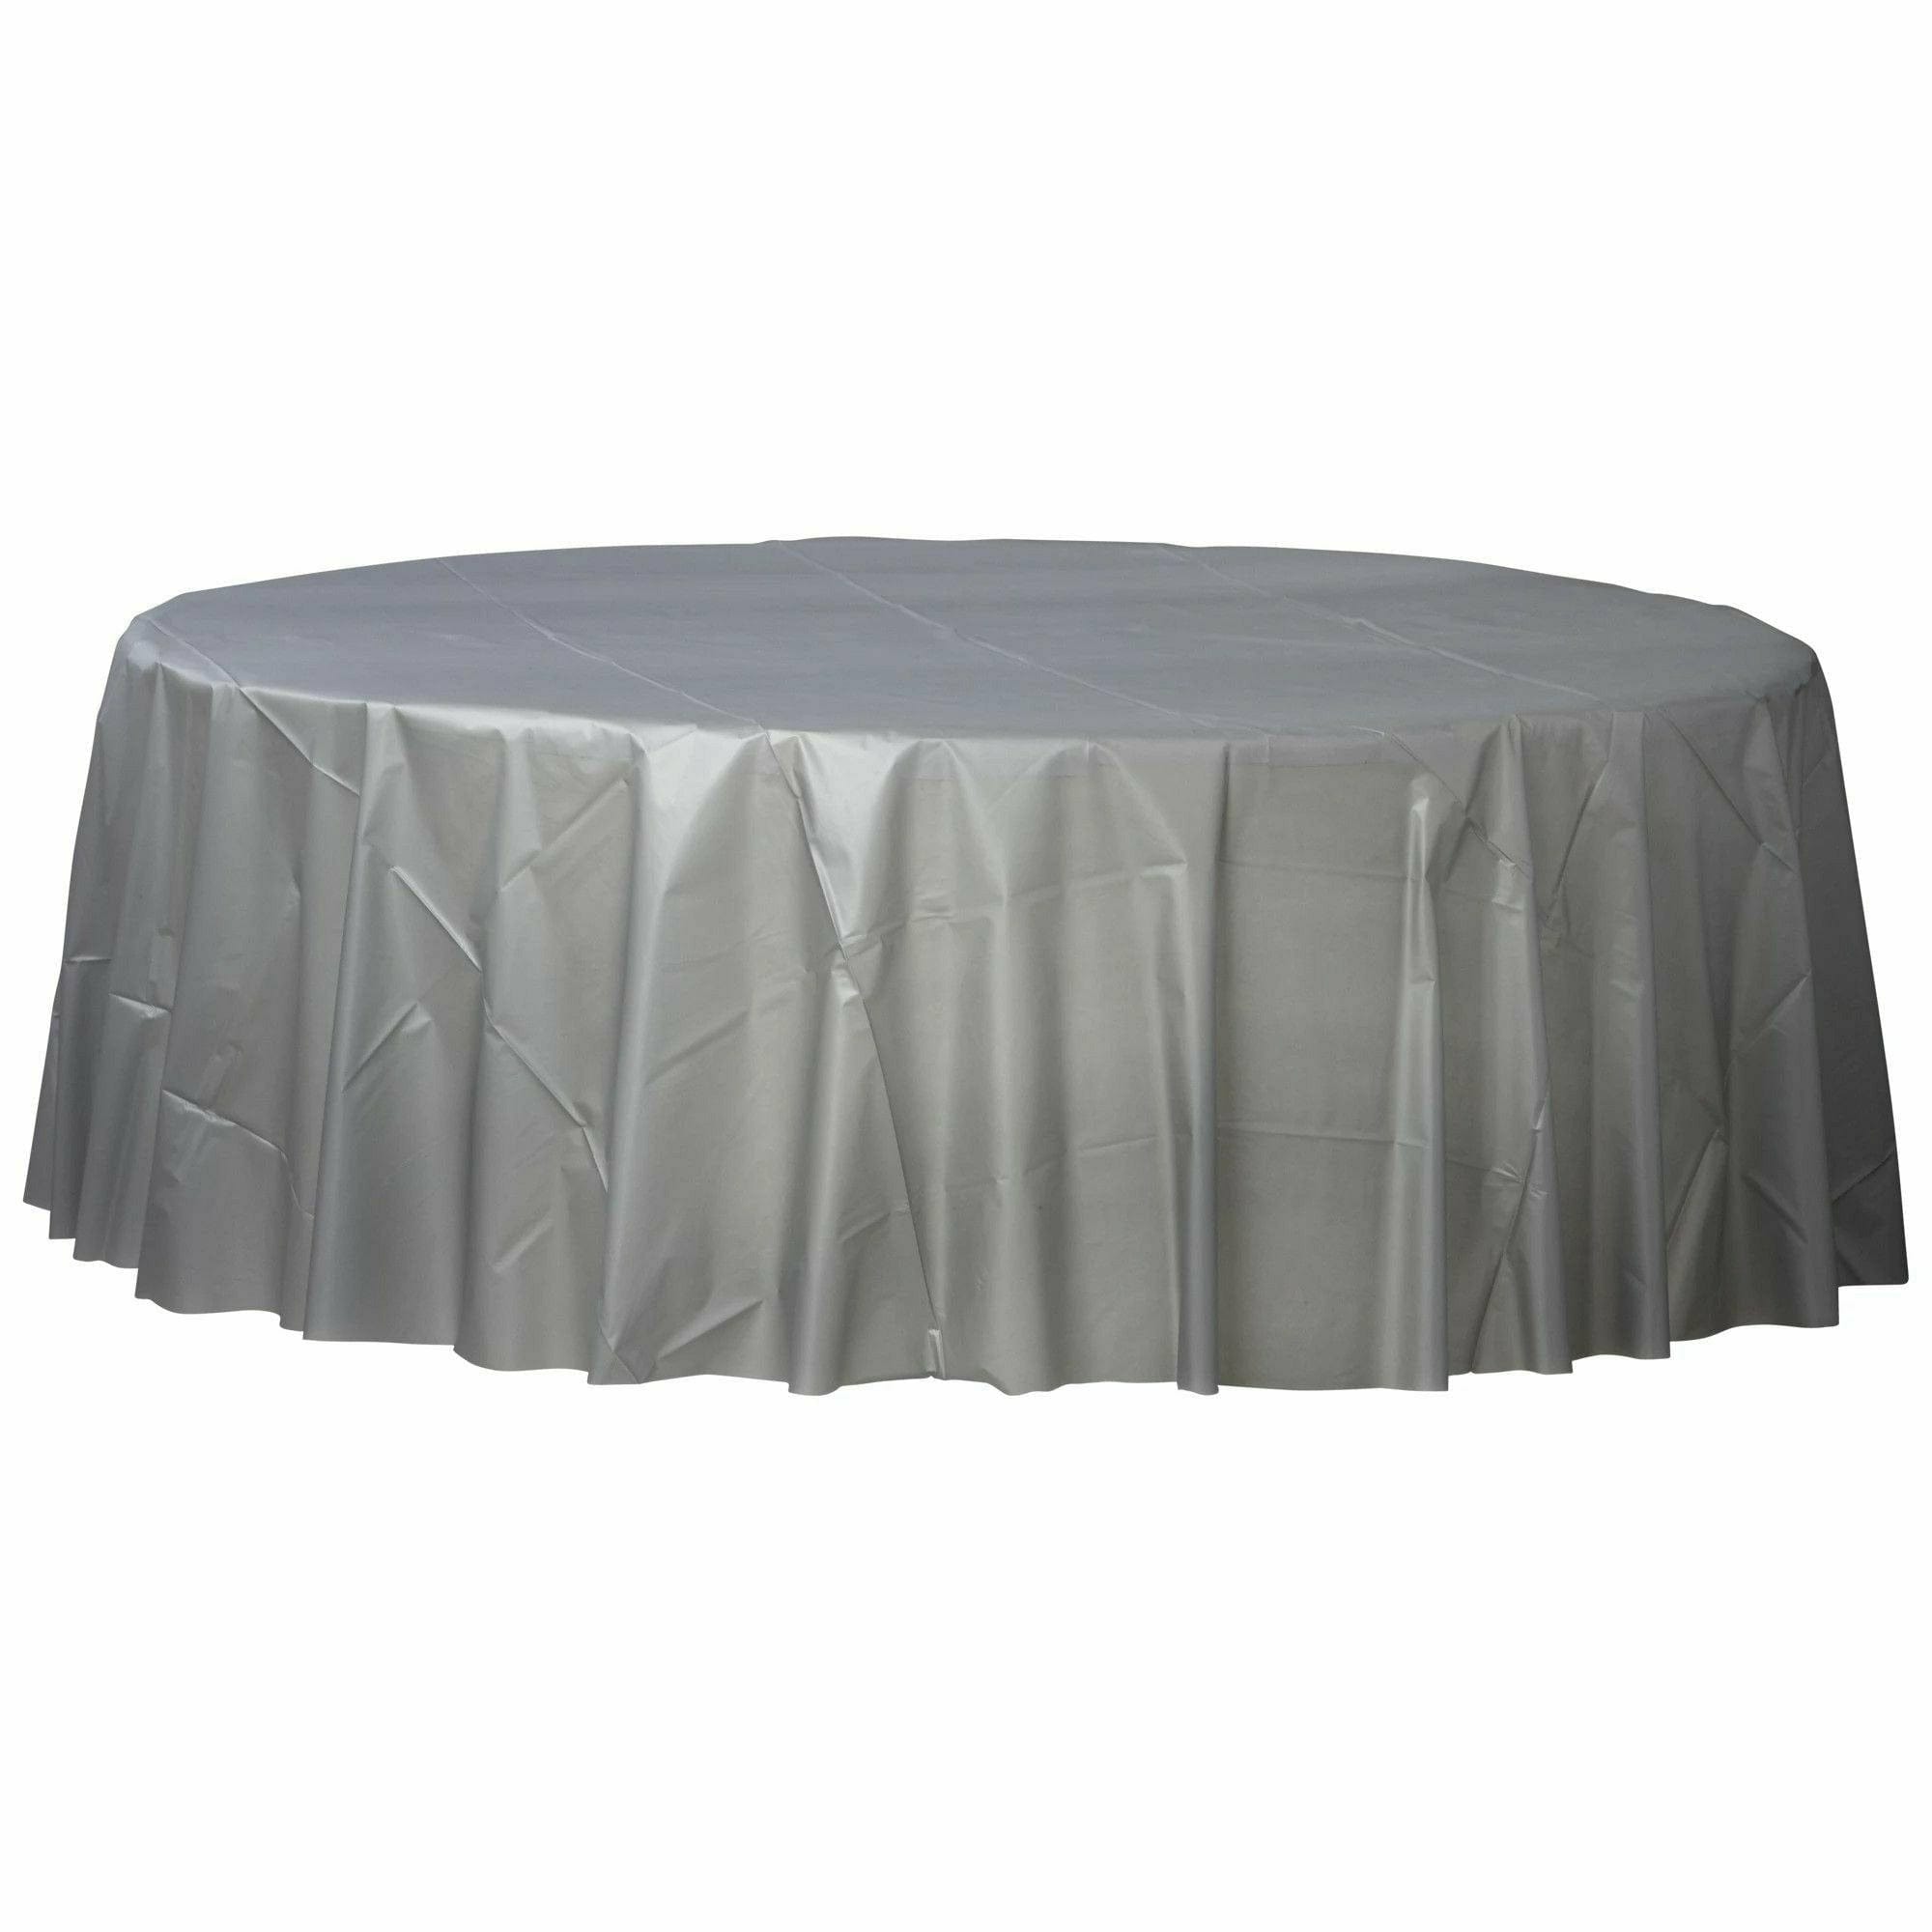 Amscan BASIC Silver - 84" Round Plastic Table Cover